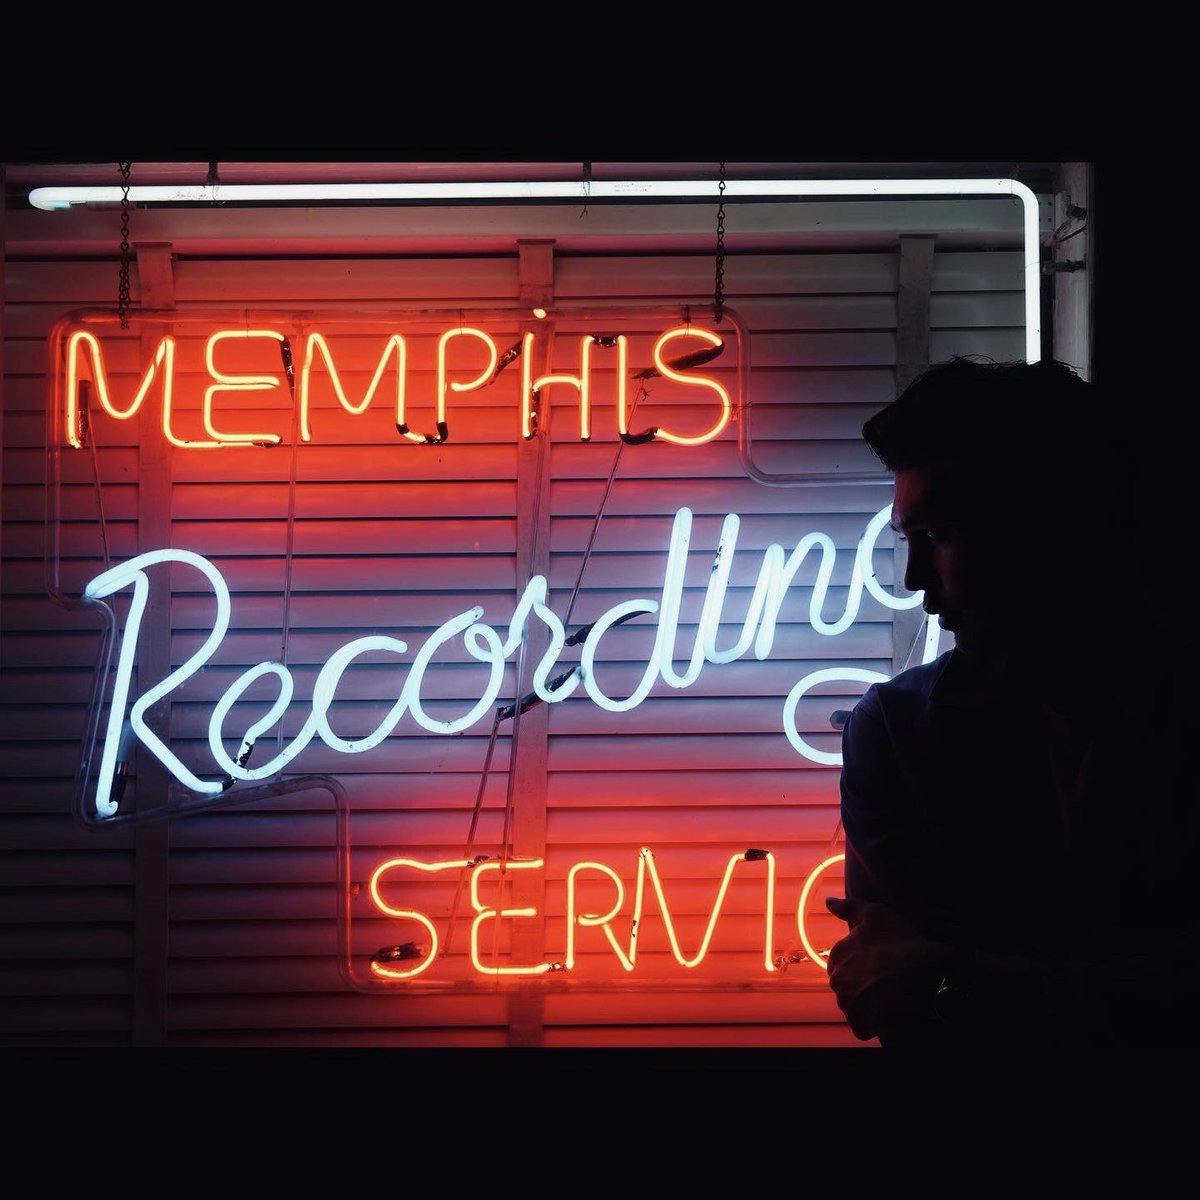 Here is Sam and Marion from Sun Studios played by Sydney based actors Kate Mulvany and Josh McConville. Speaking of Sun Studios, here’s a snap I took of Austin on our first road tour of Memphis, Tennessee back in 2019📸 #ElvisThursday #Elvis #TCB #ElvisMovie @elvismovie